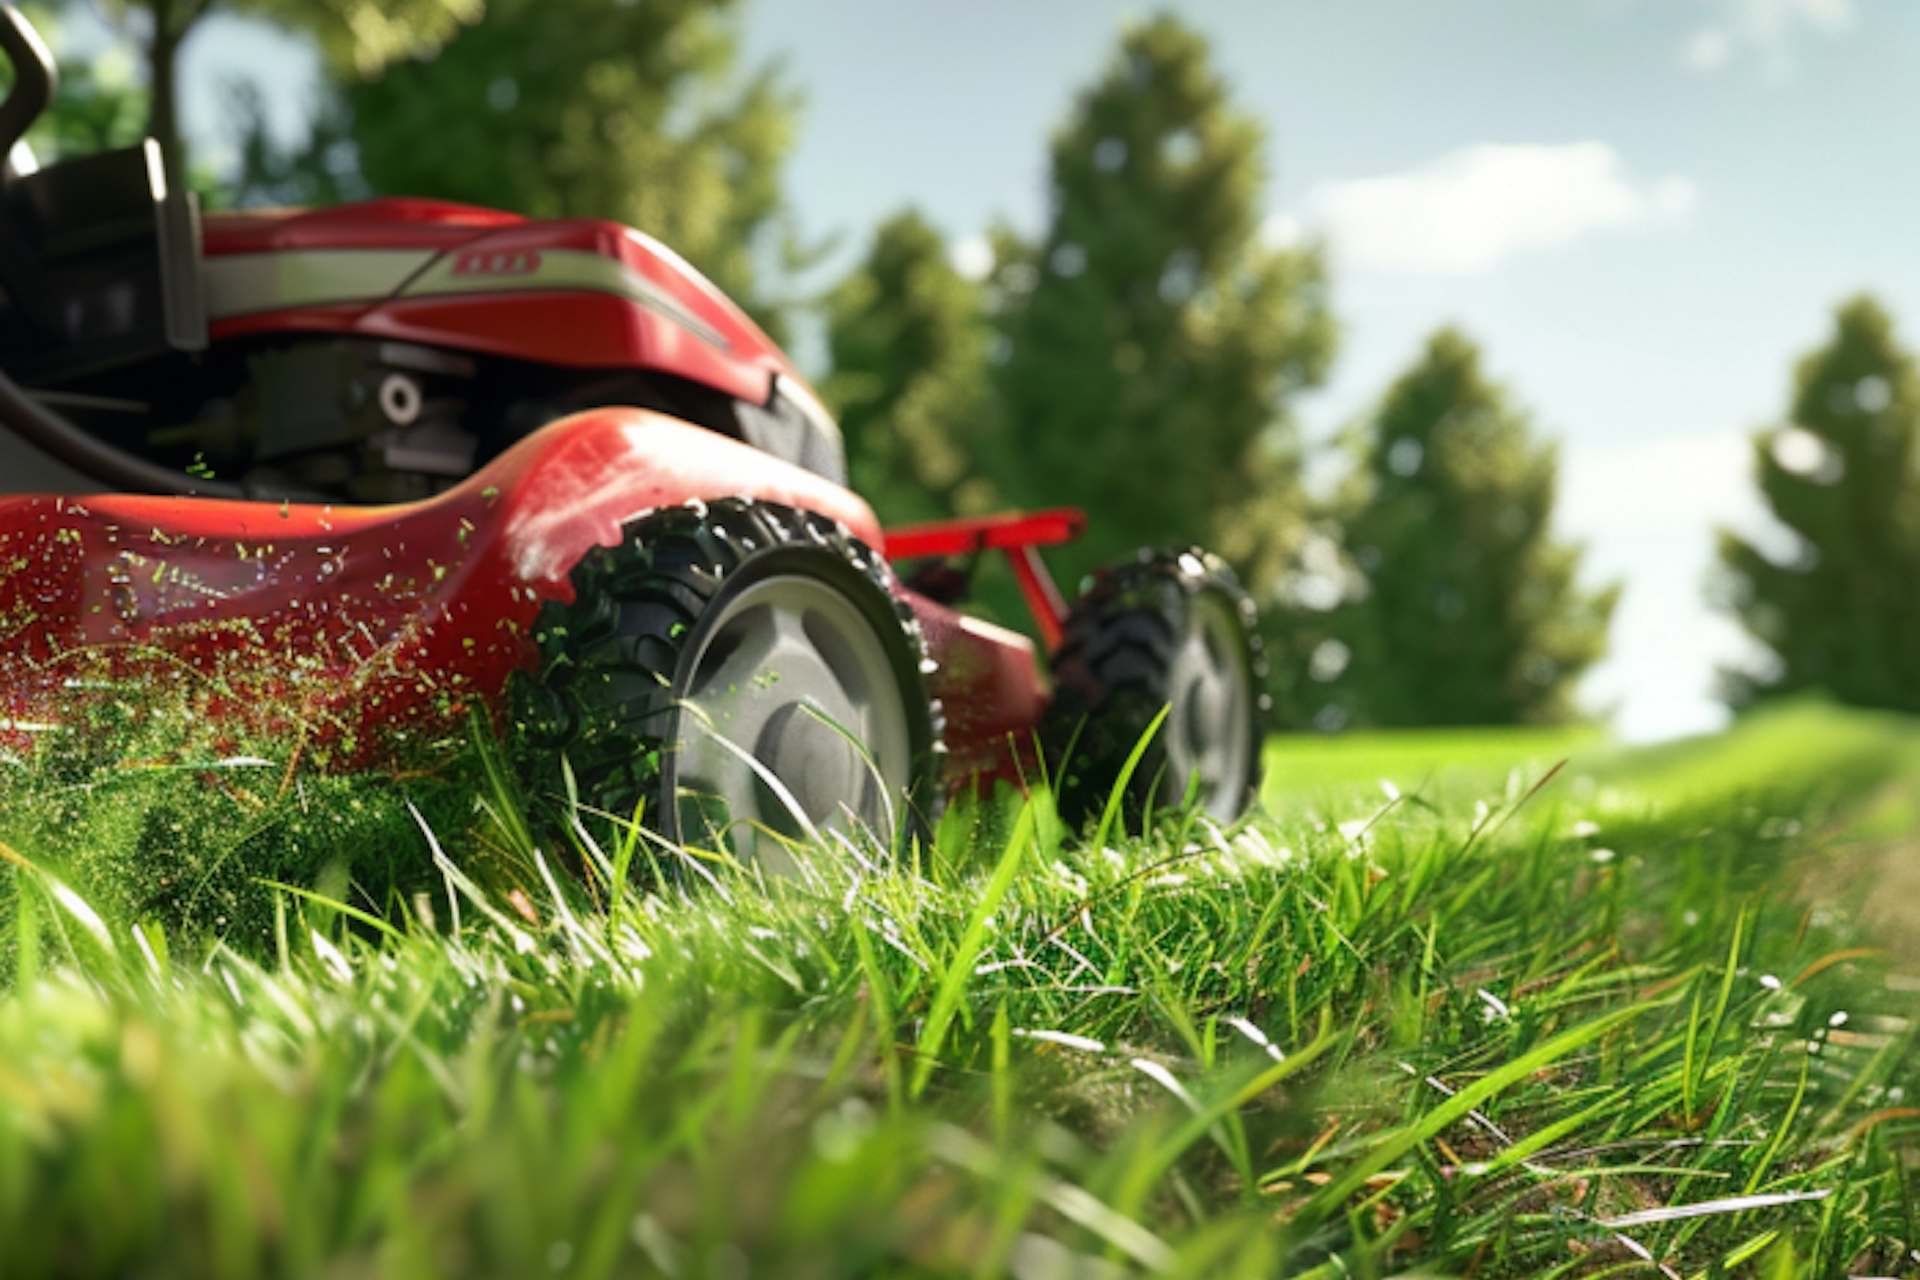 yard pest control involves many simple lawn care habits